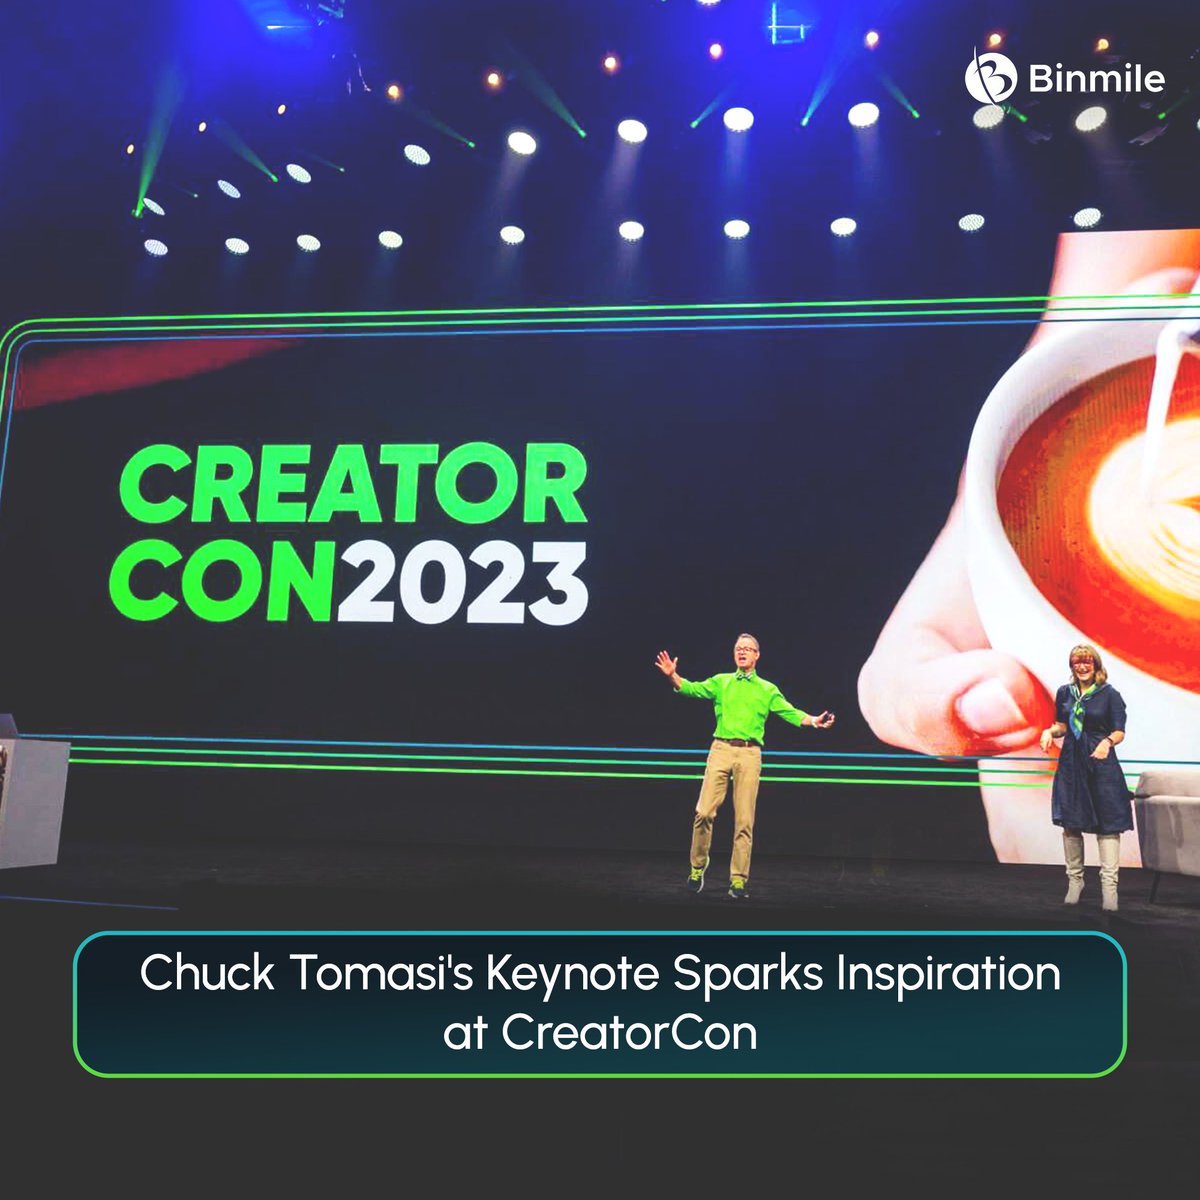 Our CEO @avanishkamboj (AK) meets @ctomasi, a well-known influencer, at #CreatorCon, whose insights and contributions were invaluable. #knowledge24 #know24 #servicenow #LasVegas #binmile #SoftwareDevelopment #BusinessInnovation #BusinessTransformation